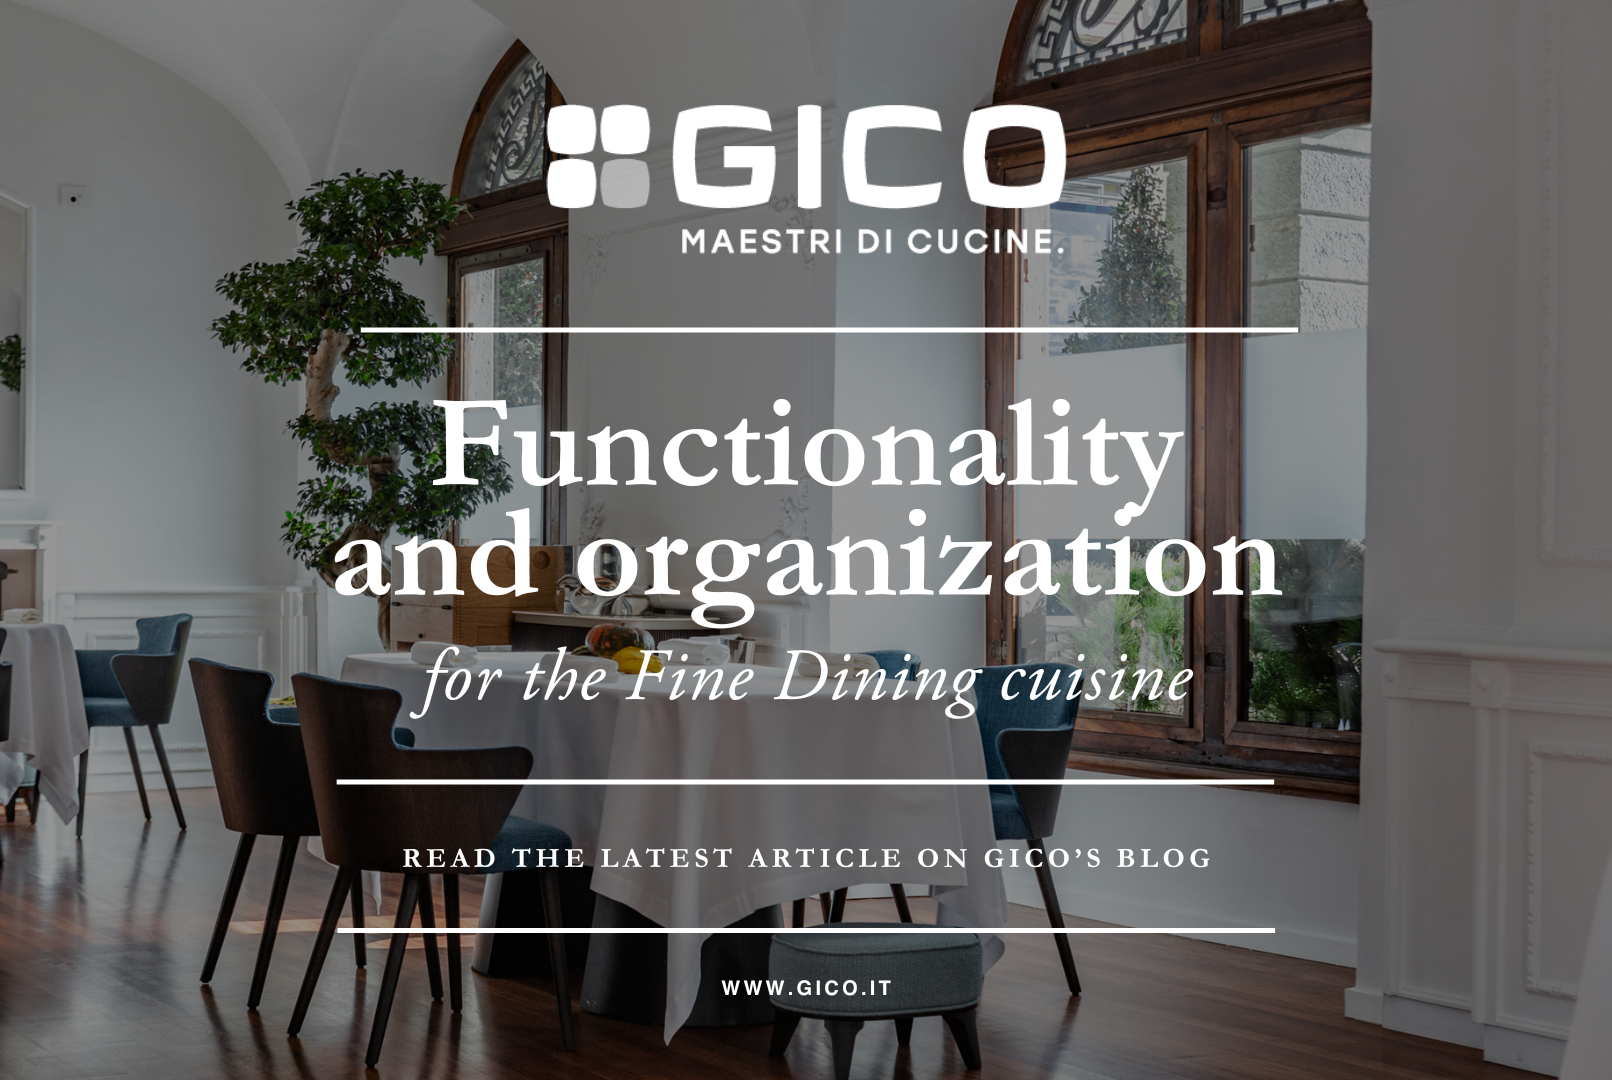 GICO: Functionality and organization for fine dining